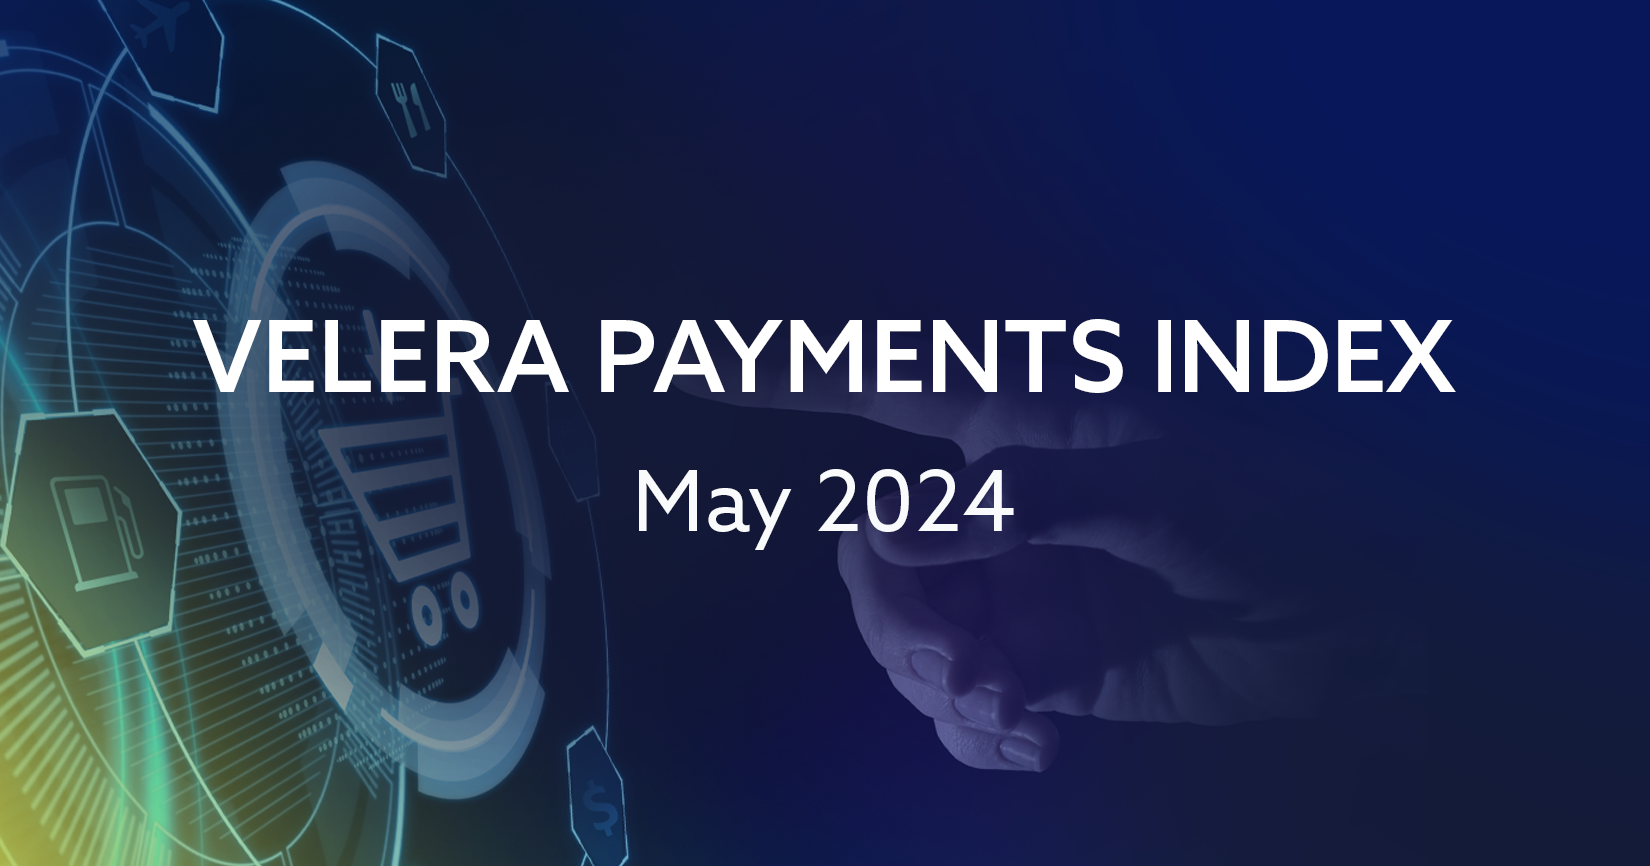 "The Velera Payments Index May 2024: A Deep Dive into Overall Food post thumbnail"